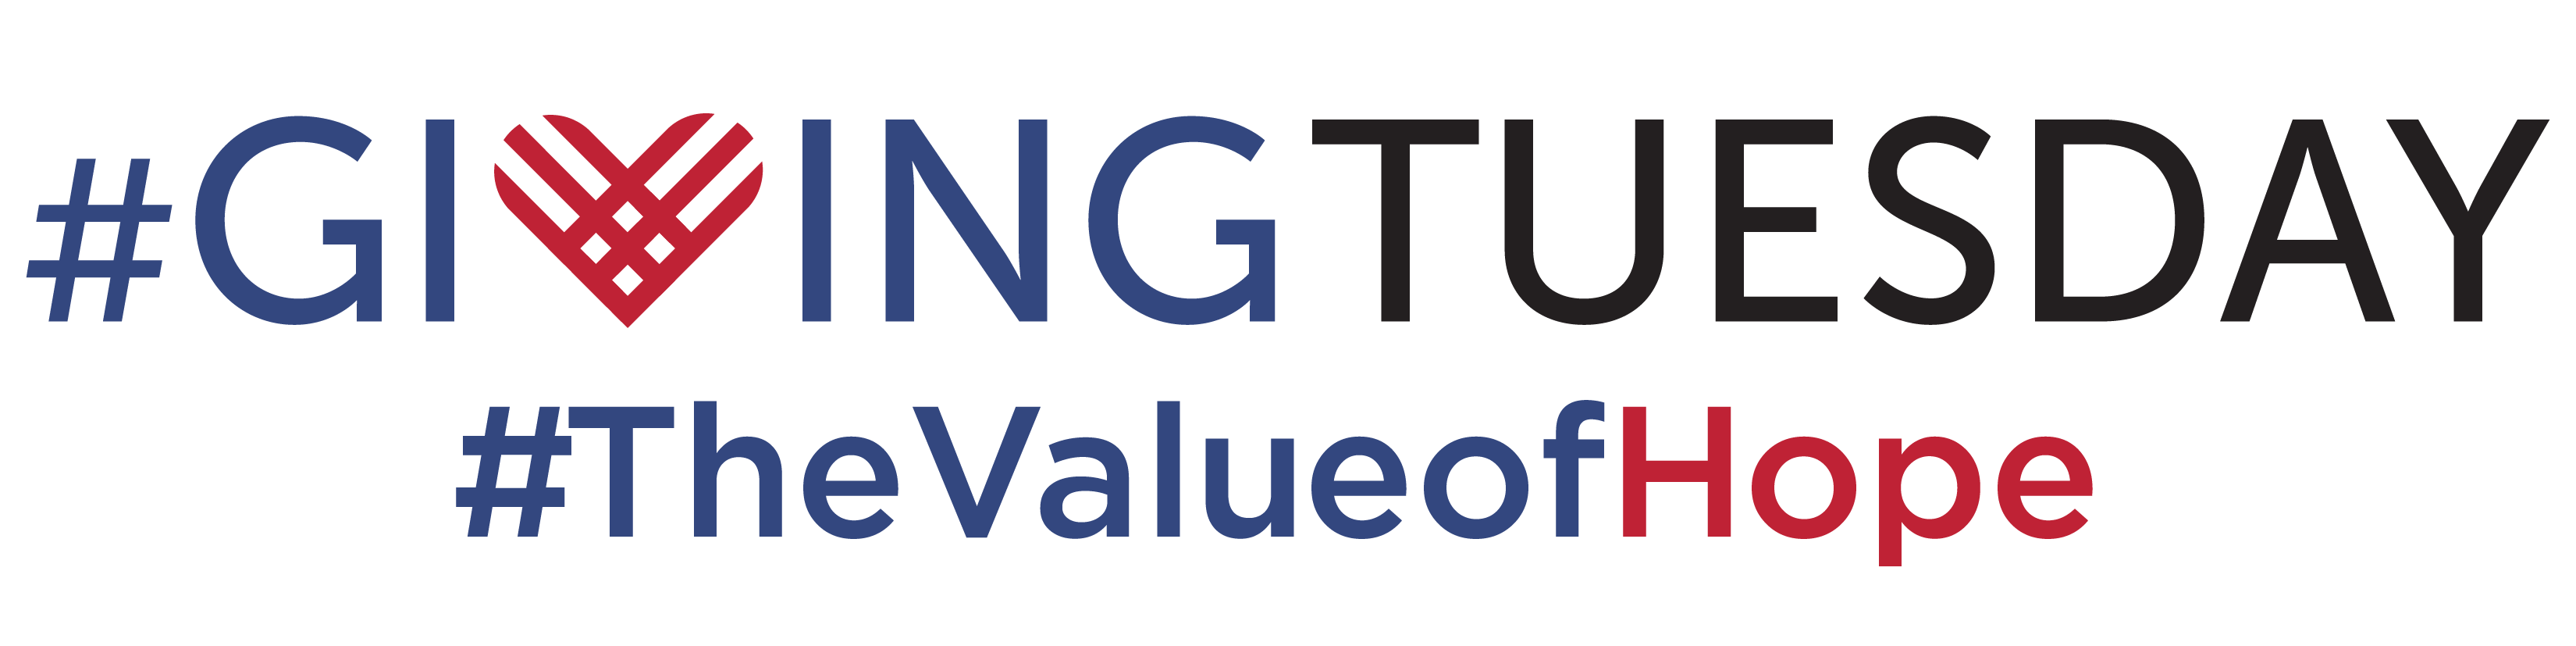 2019.0913 Giving Tuesday + #thevalueofhope